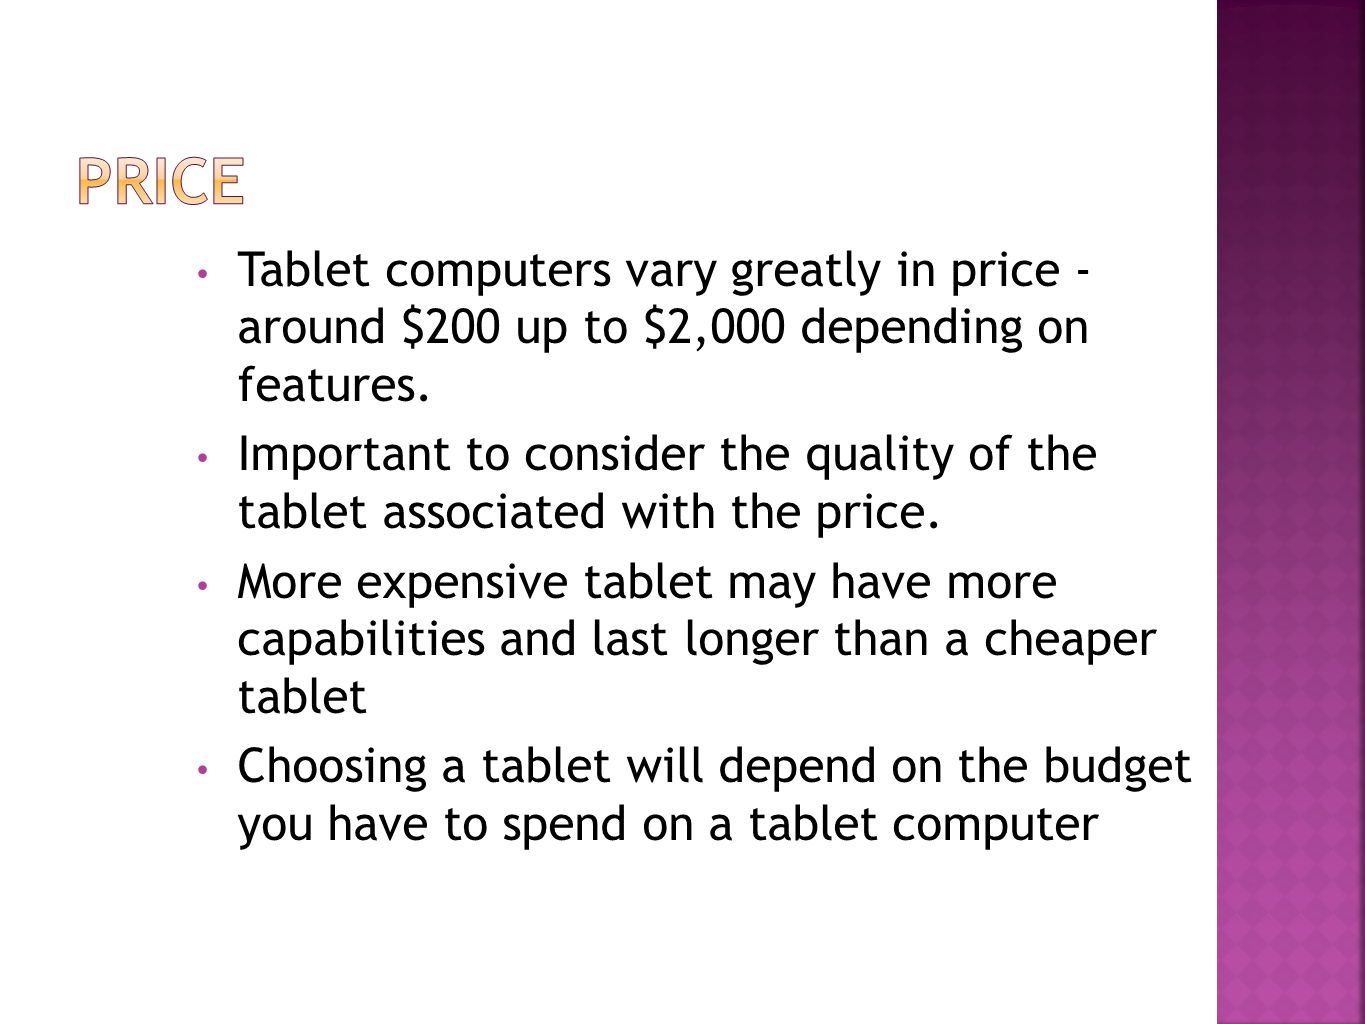 Tablet computers vary greatly in price - around $200 up to $2,000 depending on features.